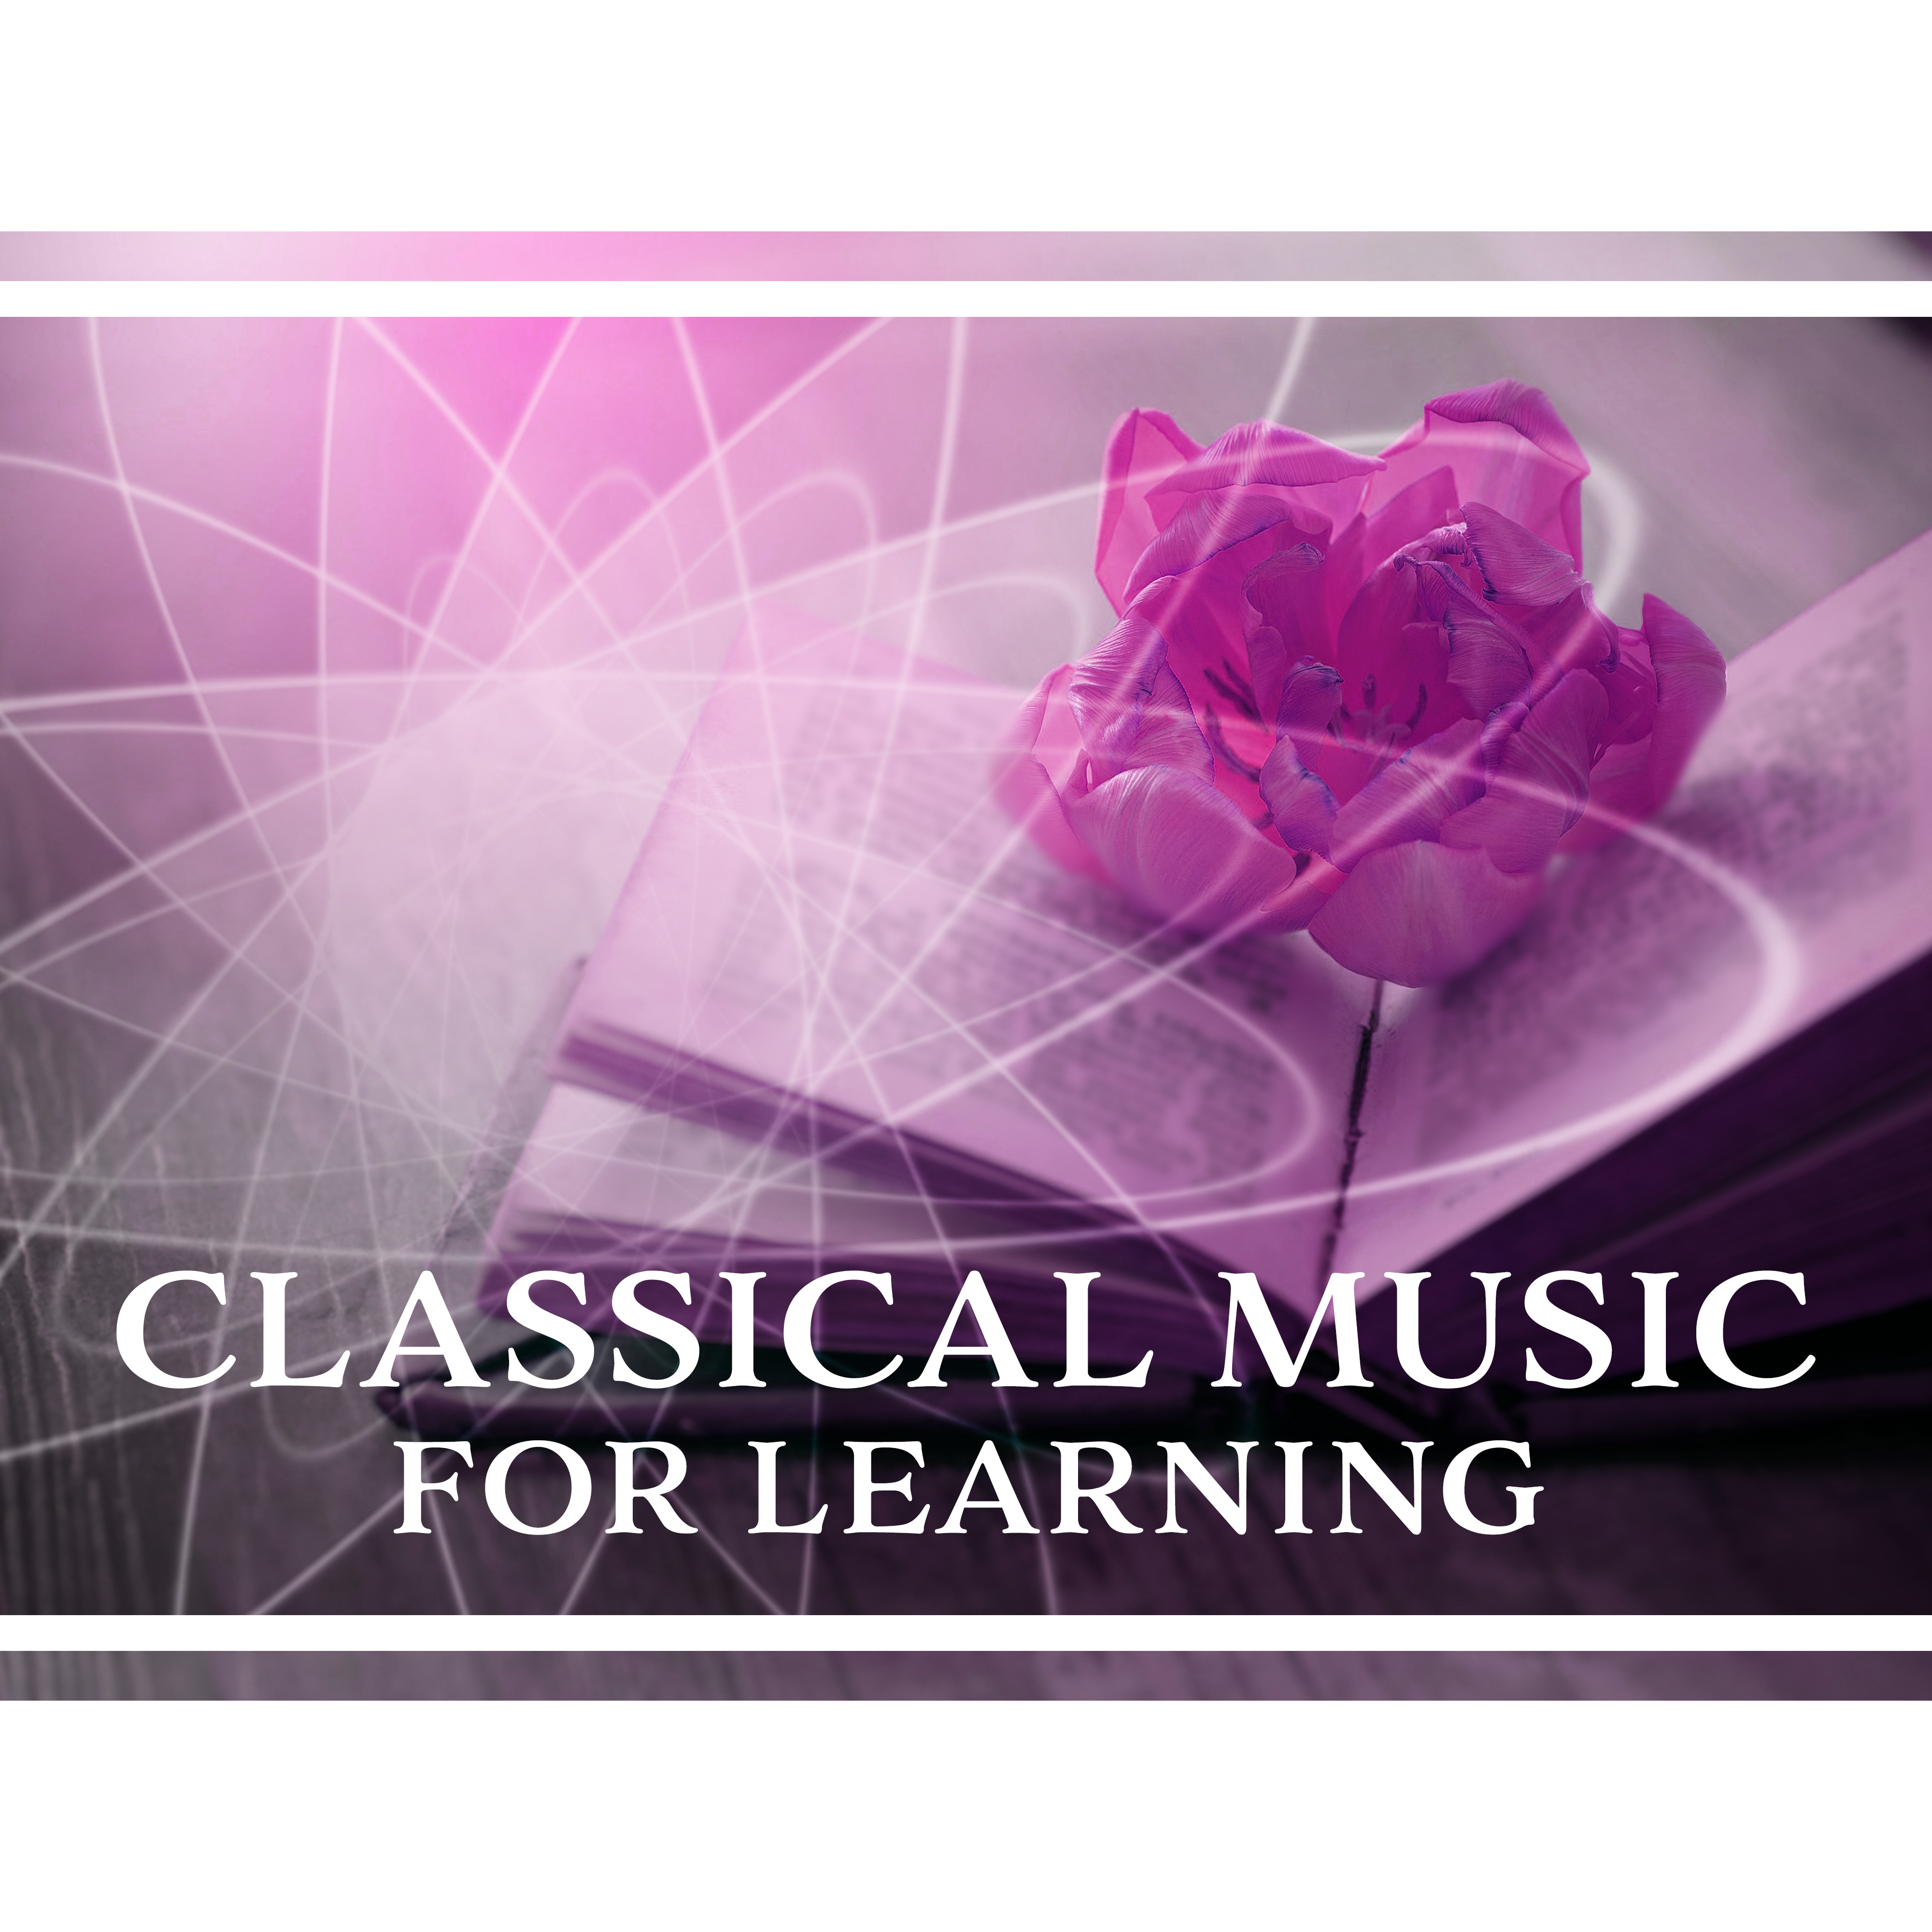 Classical Music for Learning – The Best Piano Music for Study, Improve Memory, Focus